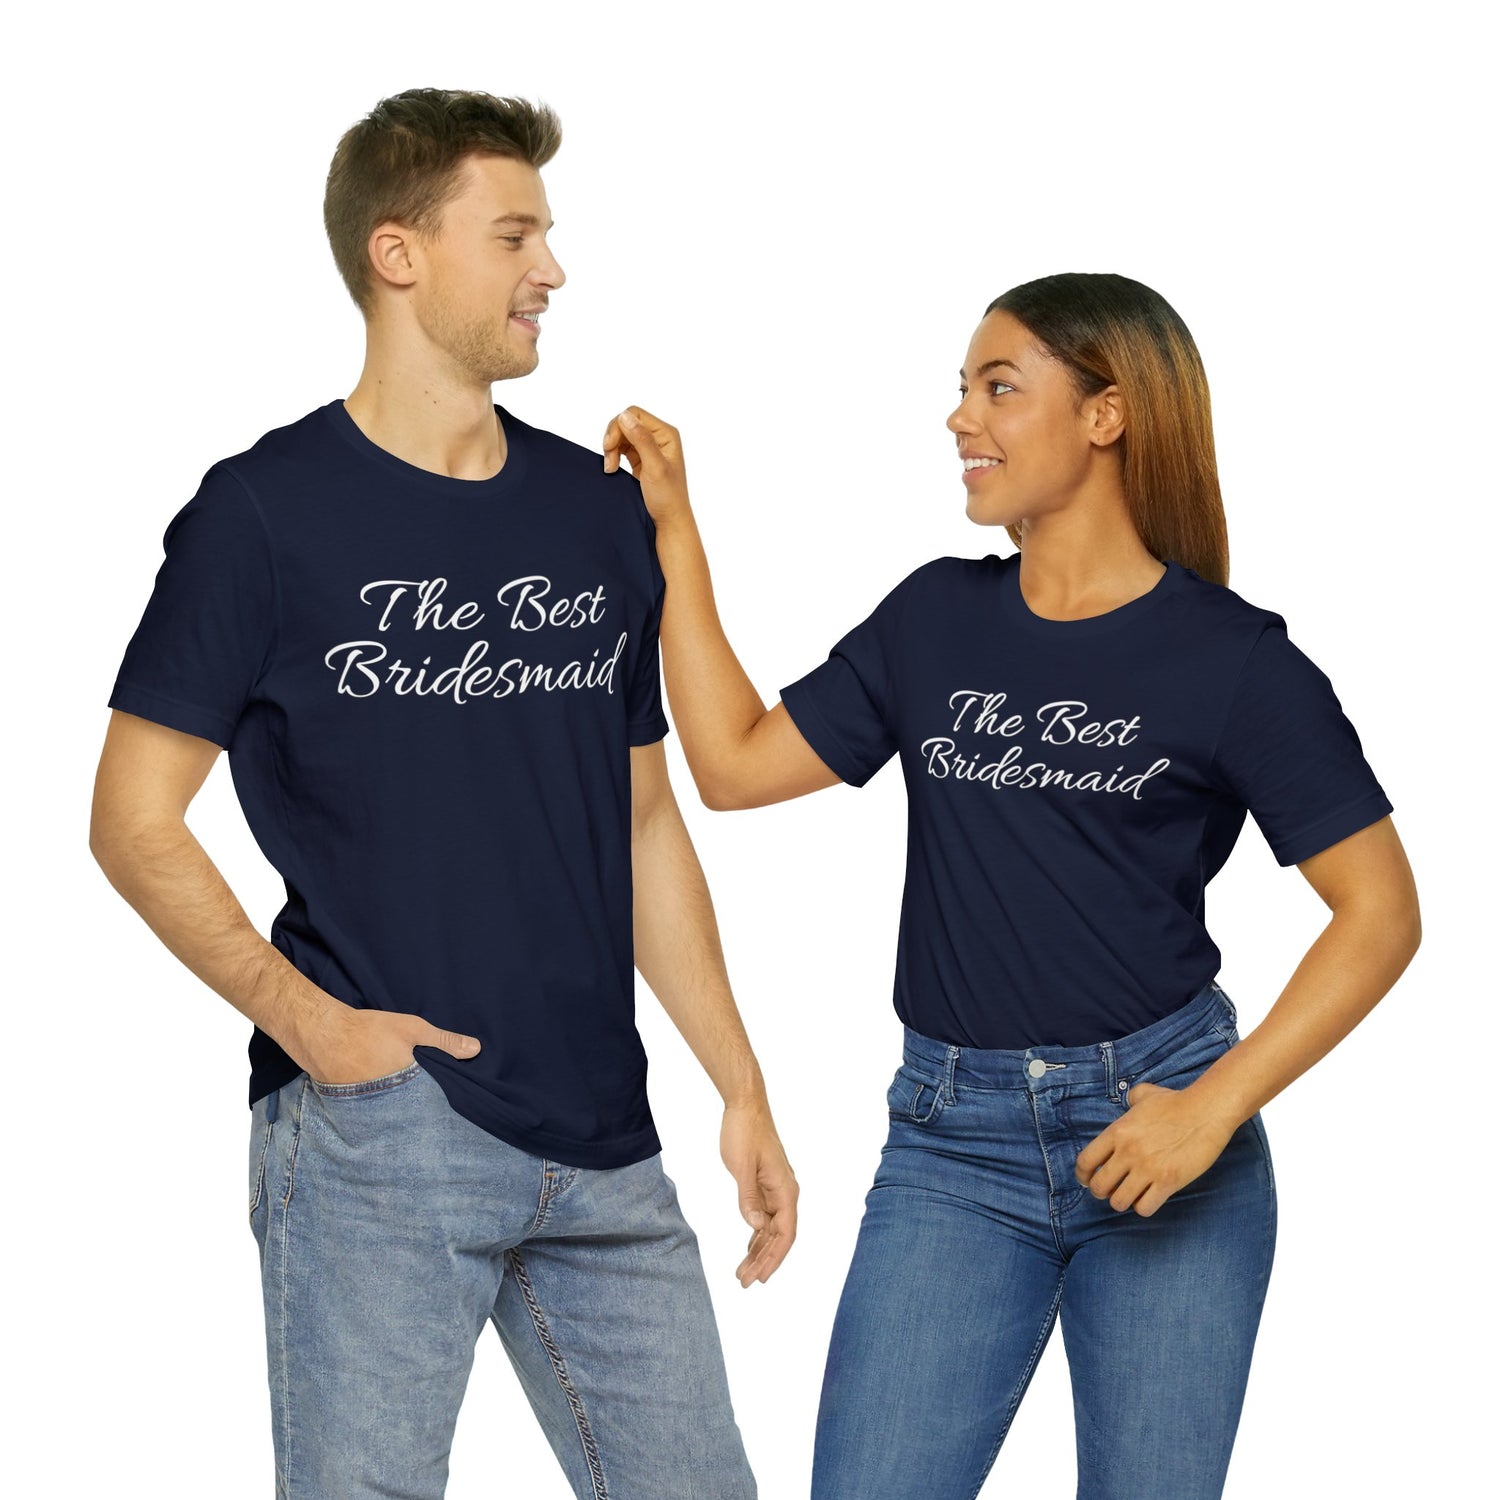 Bridal Support Bridesmaid Love Cotton Crew neck Customer Satisfaction Gratitude Expression Heartfelt Message Meaningful Tee Pre-Wedding Celebrations Quality Craftsmanship Special Bond Stylish Comfort T-shirts Thoughtful Gift Unforgettable Memories Unisex Wedding Day Apparel Wedding Party Apparel Wedding Party Pride